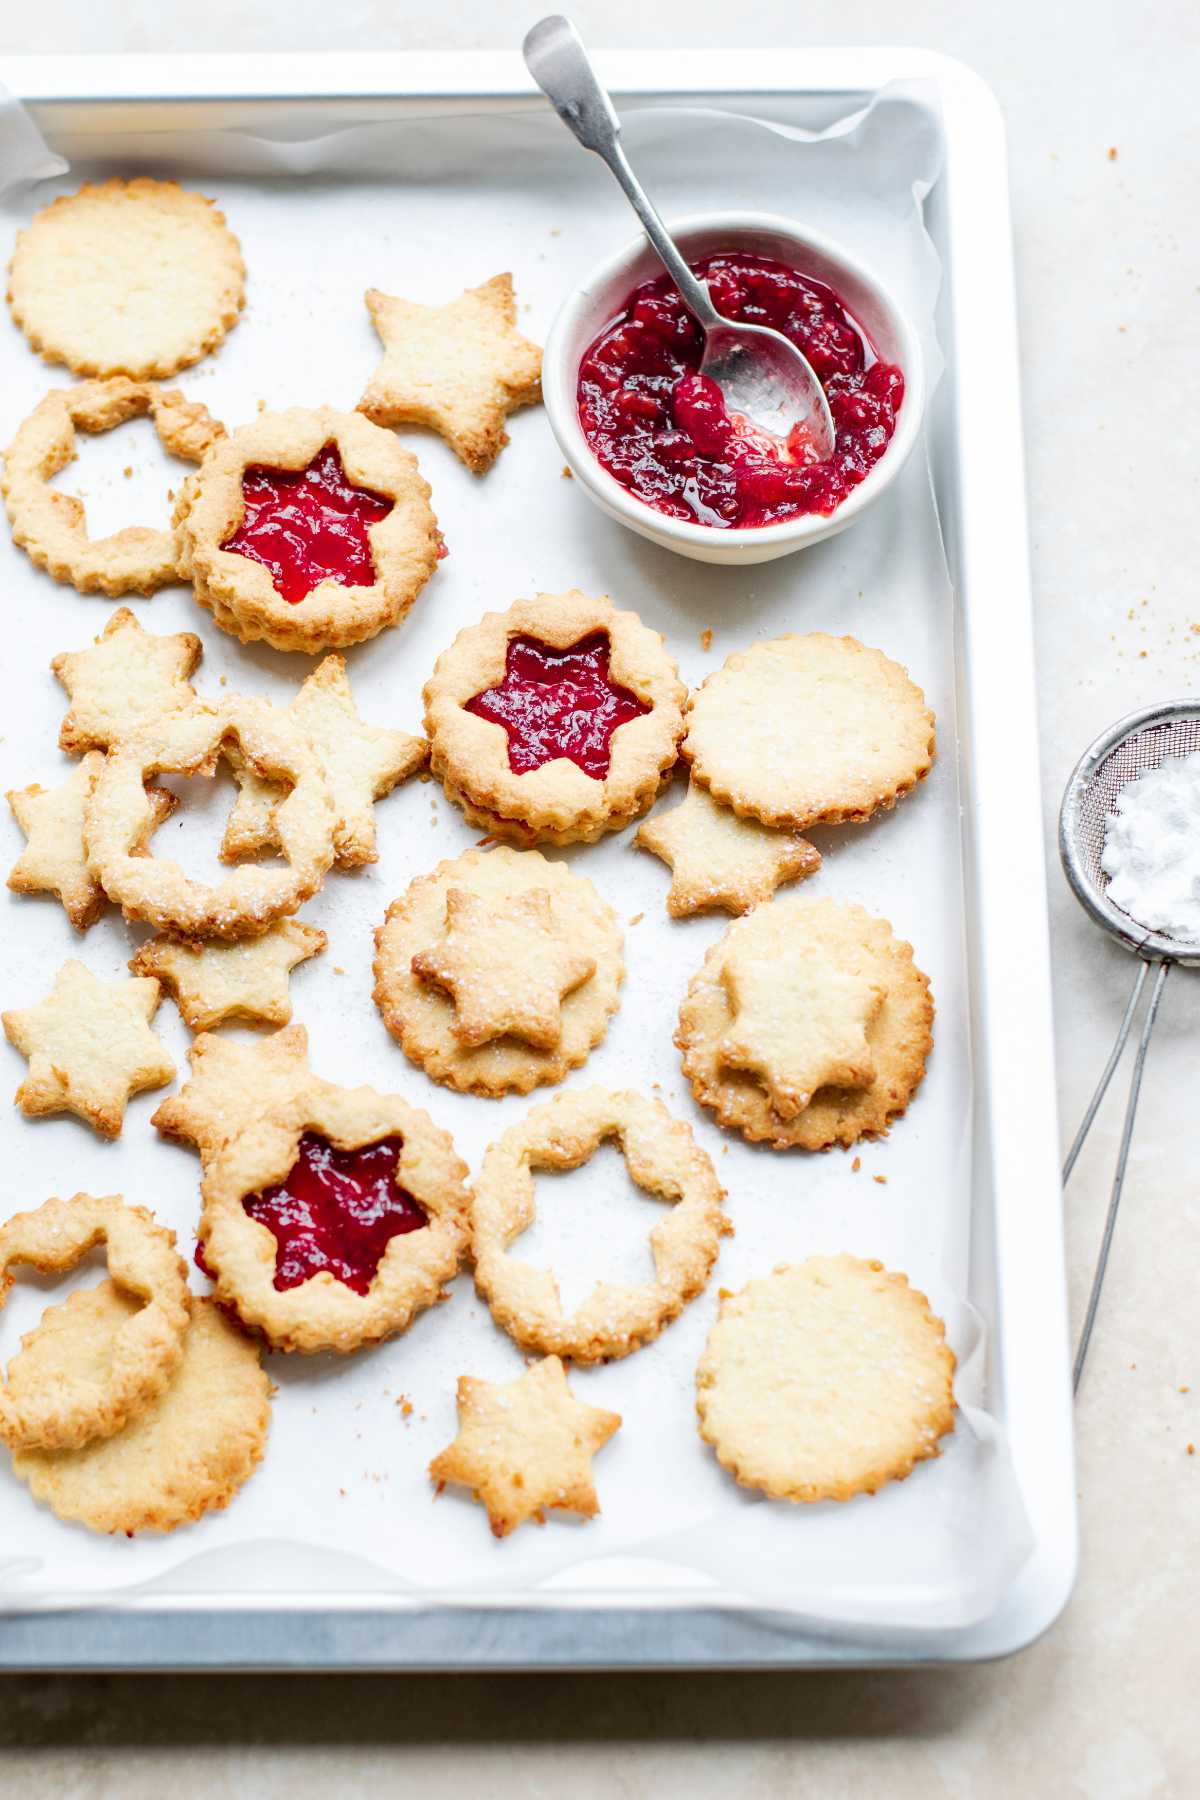 Star shaped Linzer cookies filled with cranberry sauce